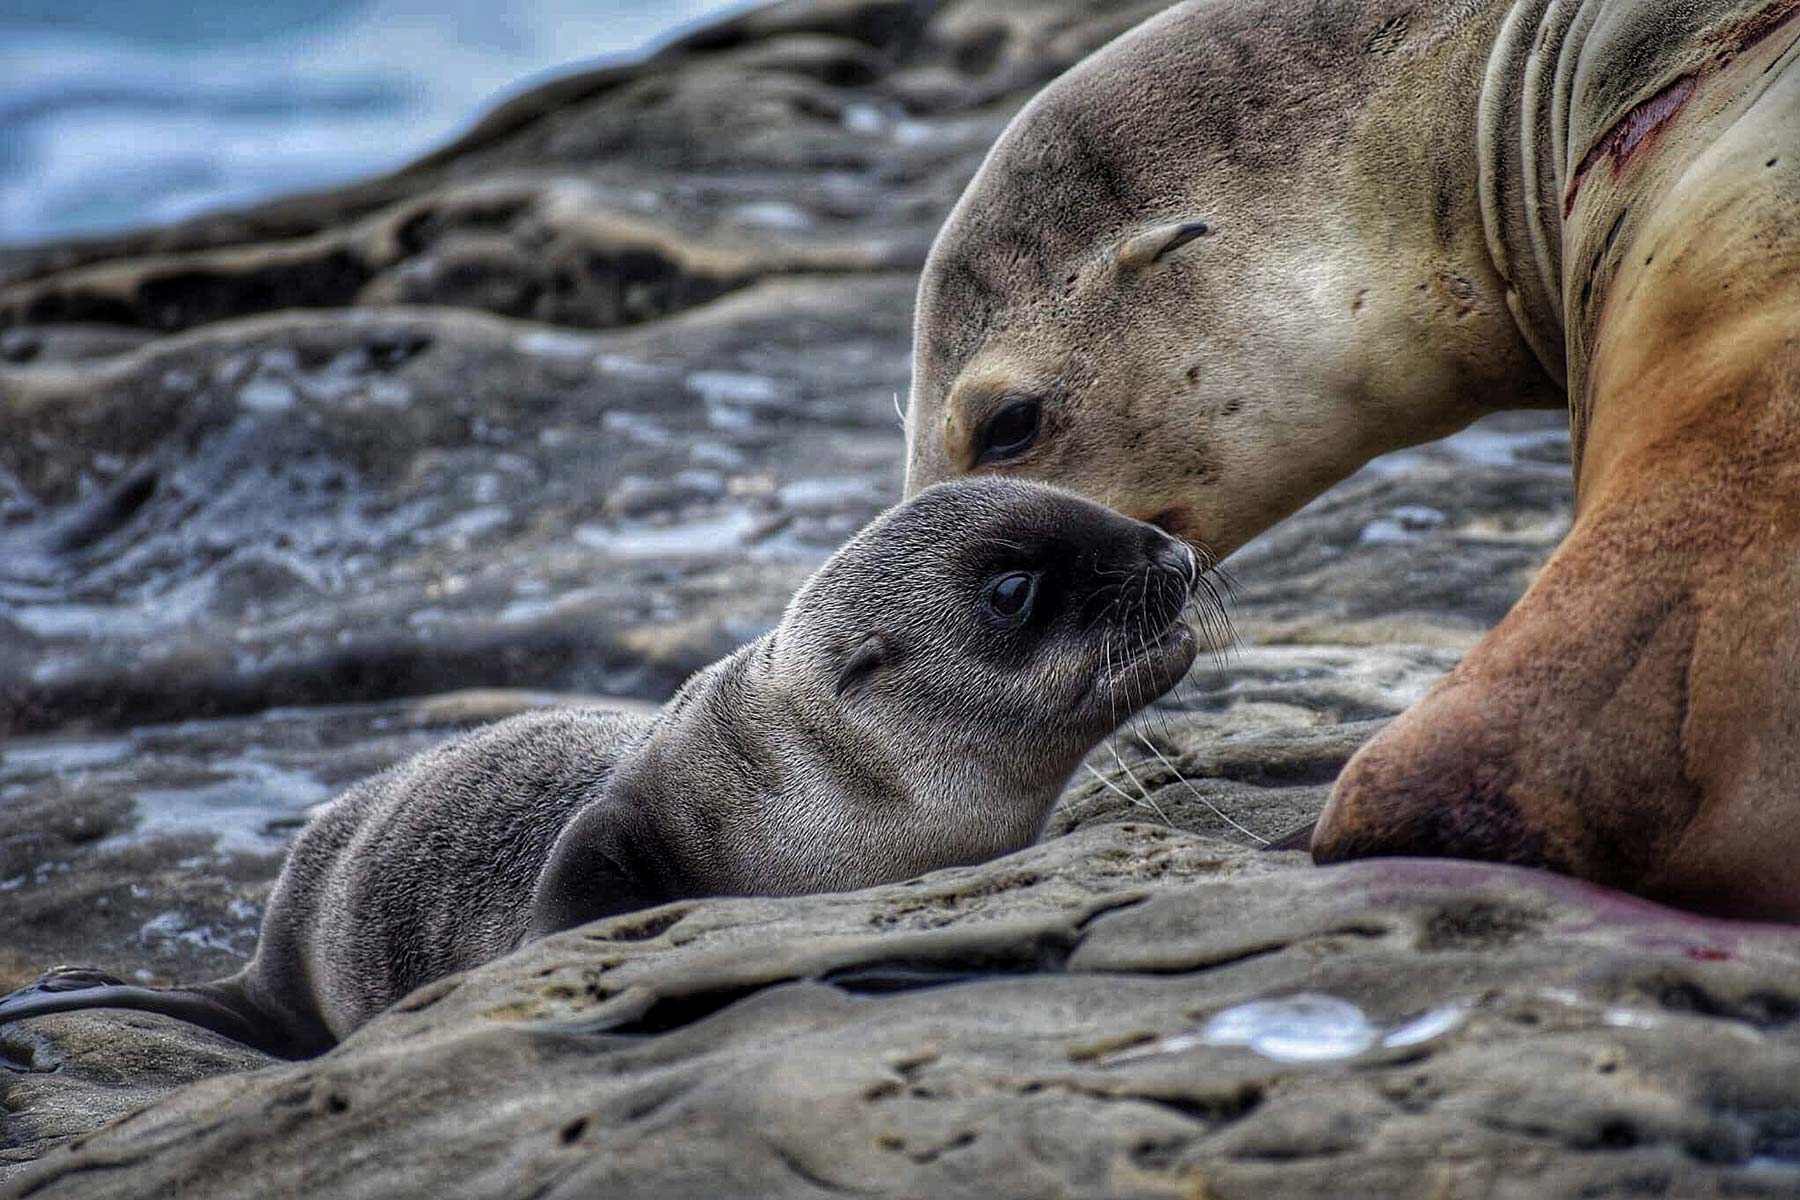 An adult seal nuzzles a baby seal on the beach